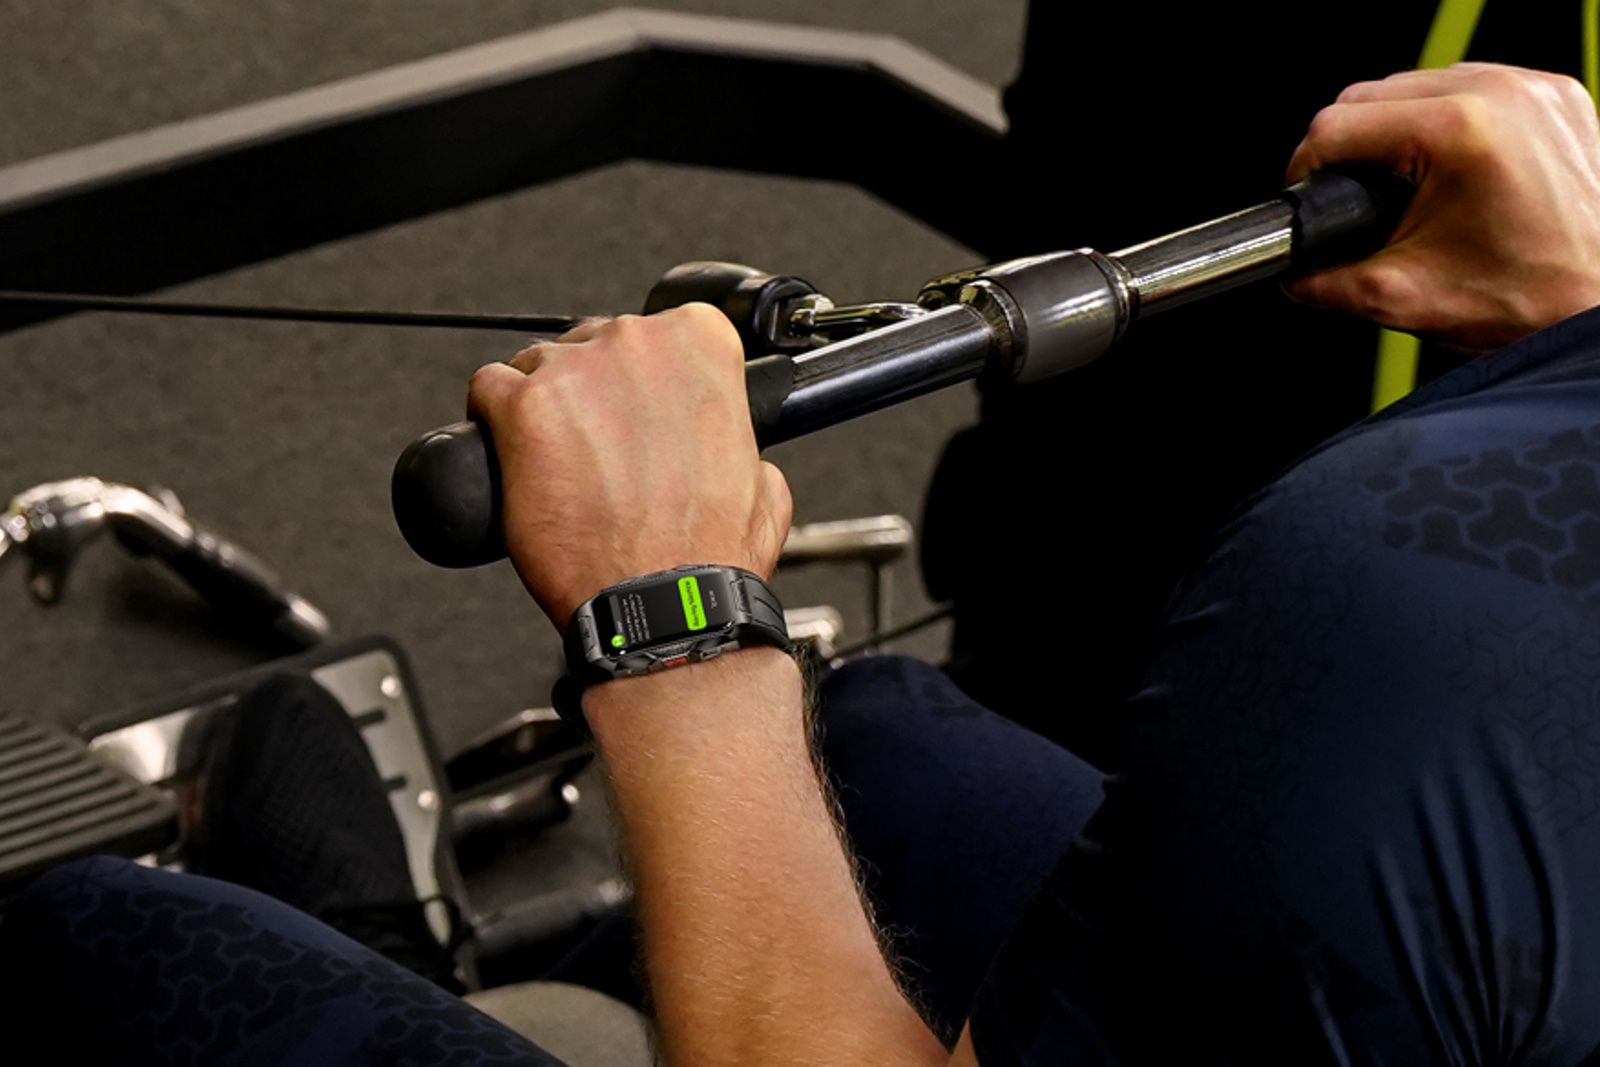 A man uses a rowing machine while wearing a Kospet Tank X1 smartwatch